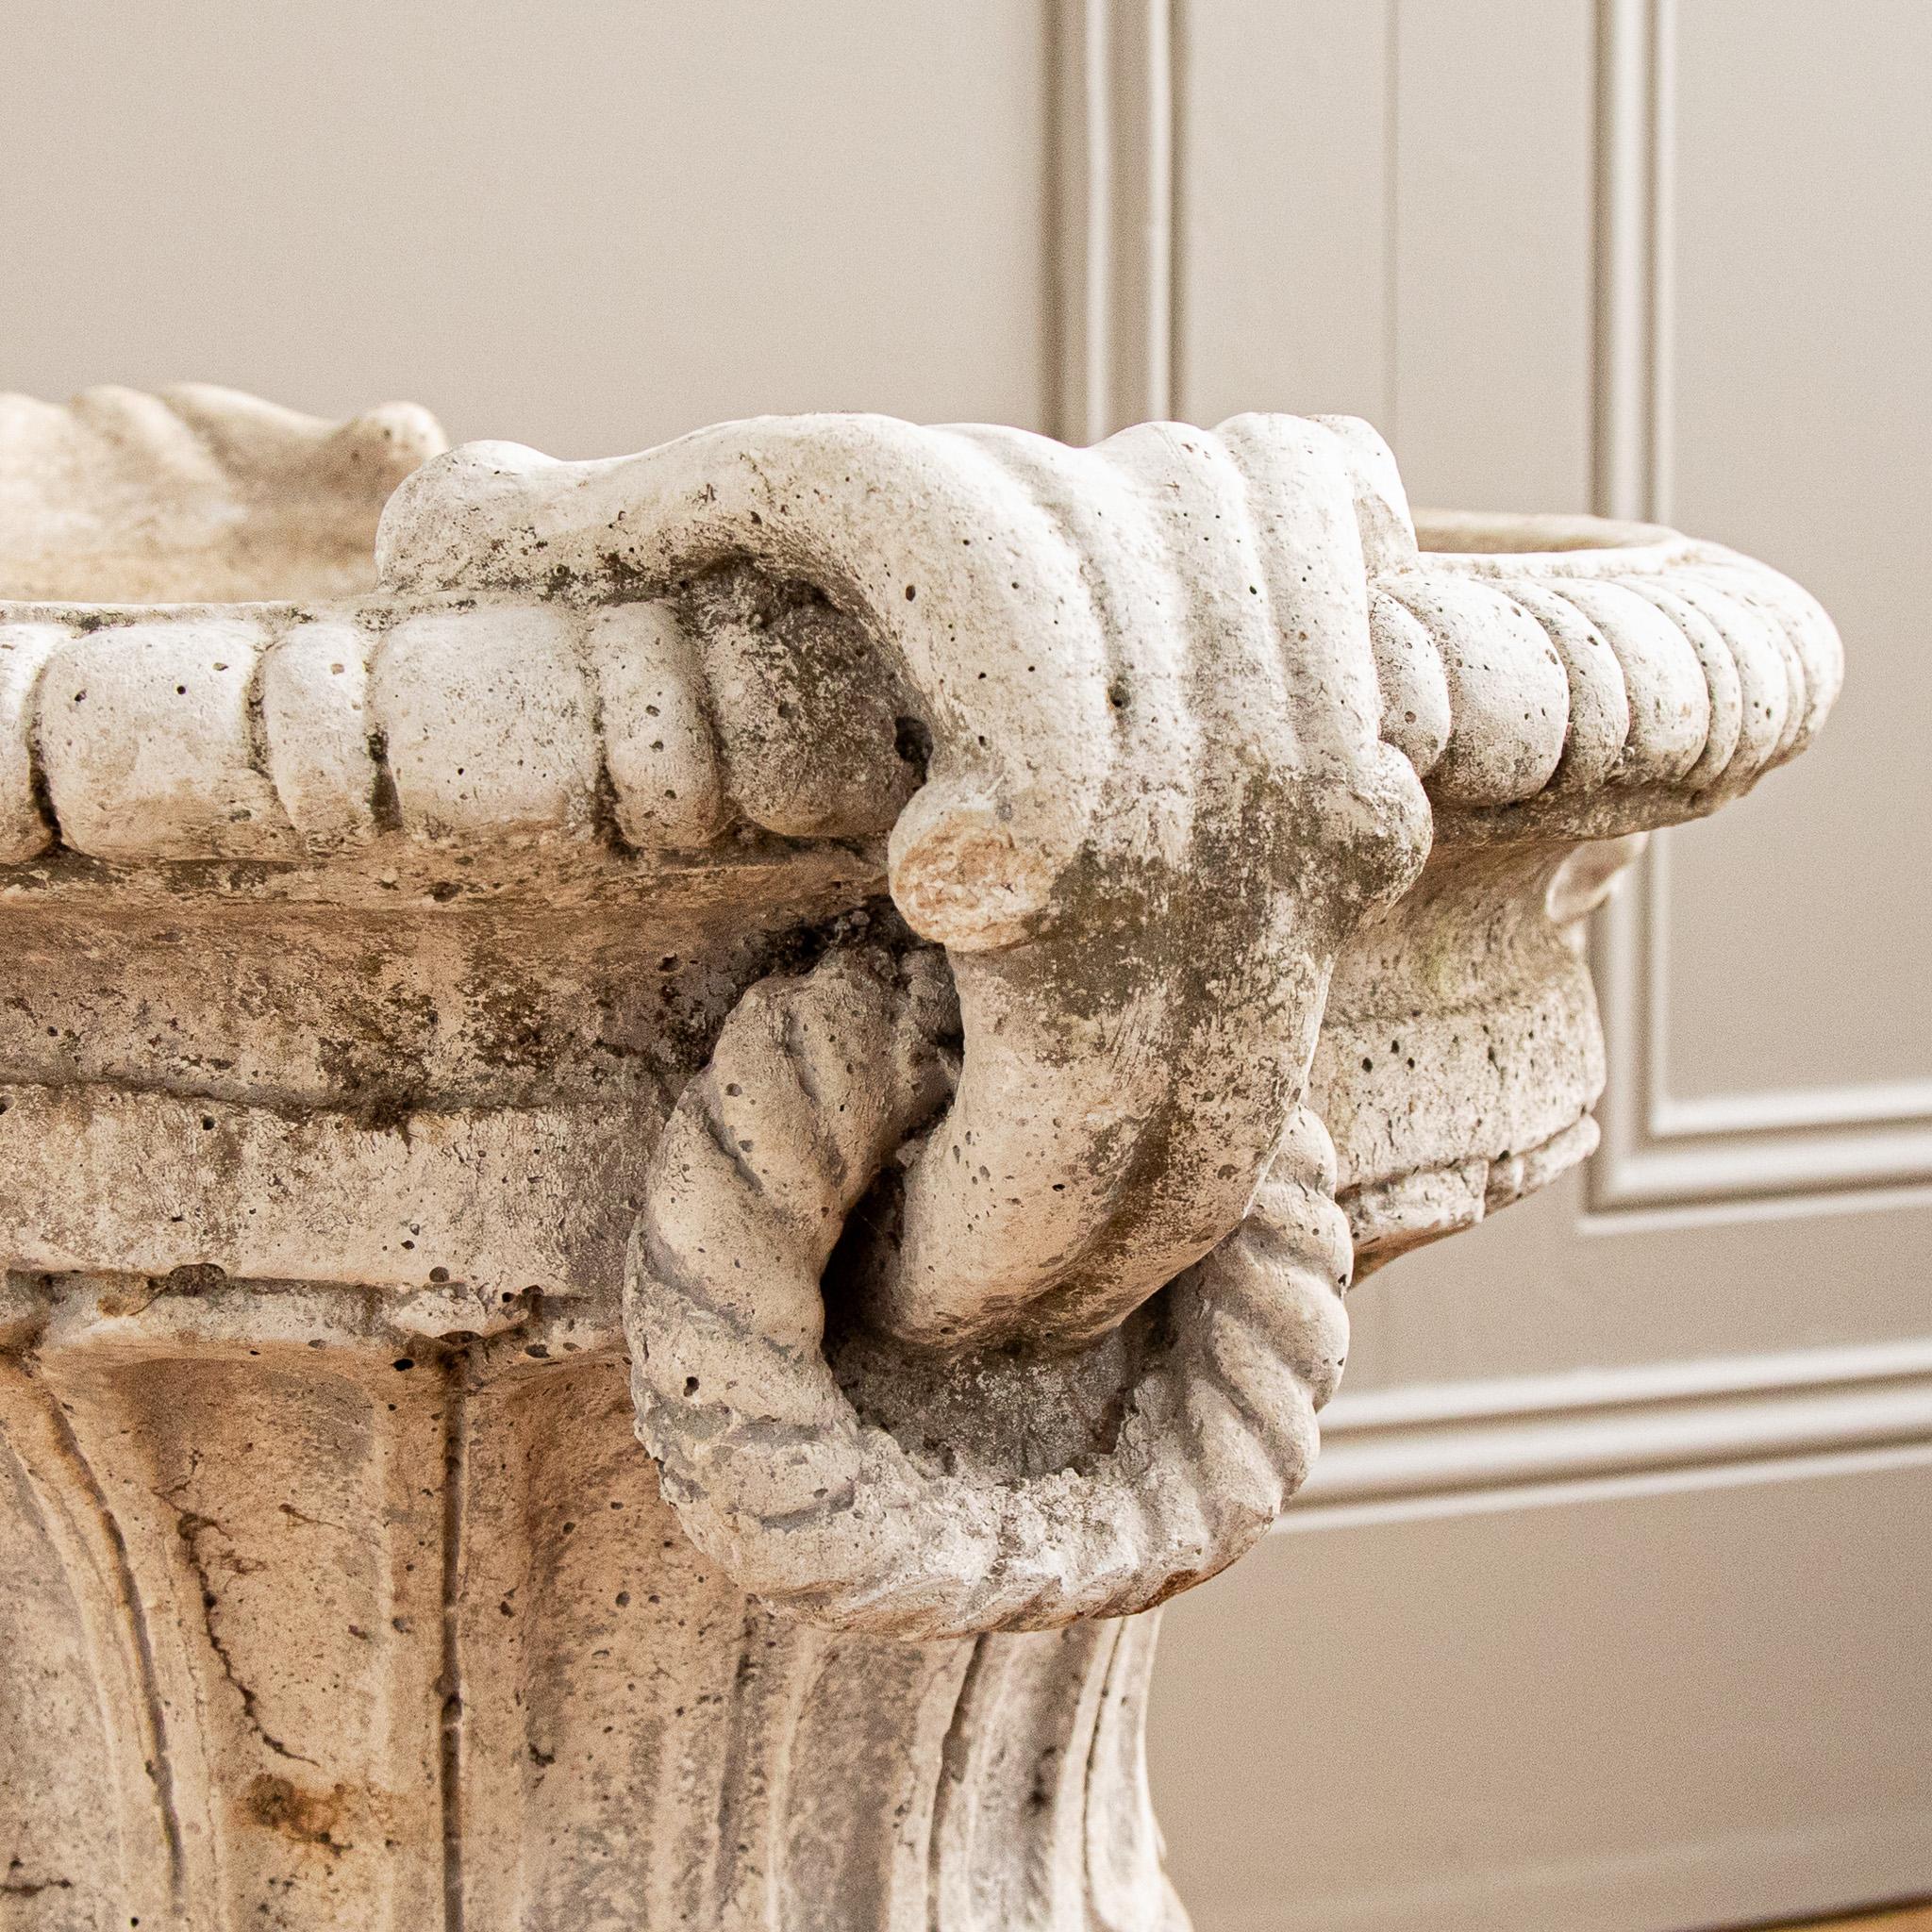 Circa Mid 1900's Set Of 4 Decorative Italian Garden Urns In Reconstituted Stone For Sale 4